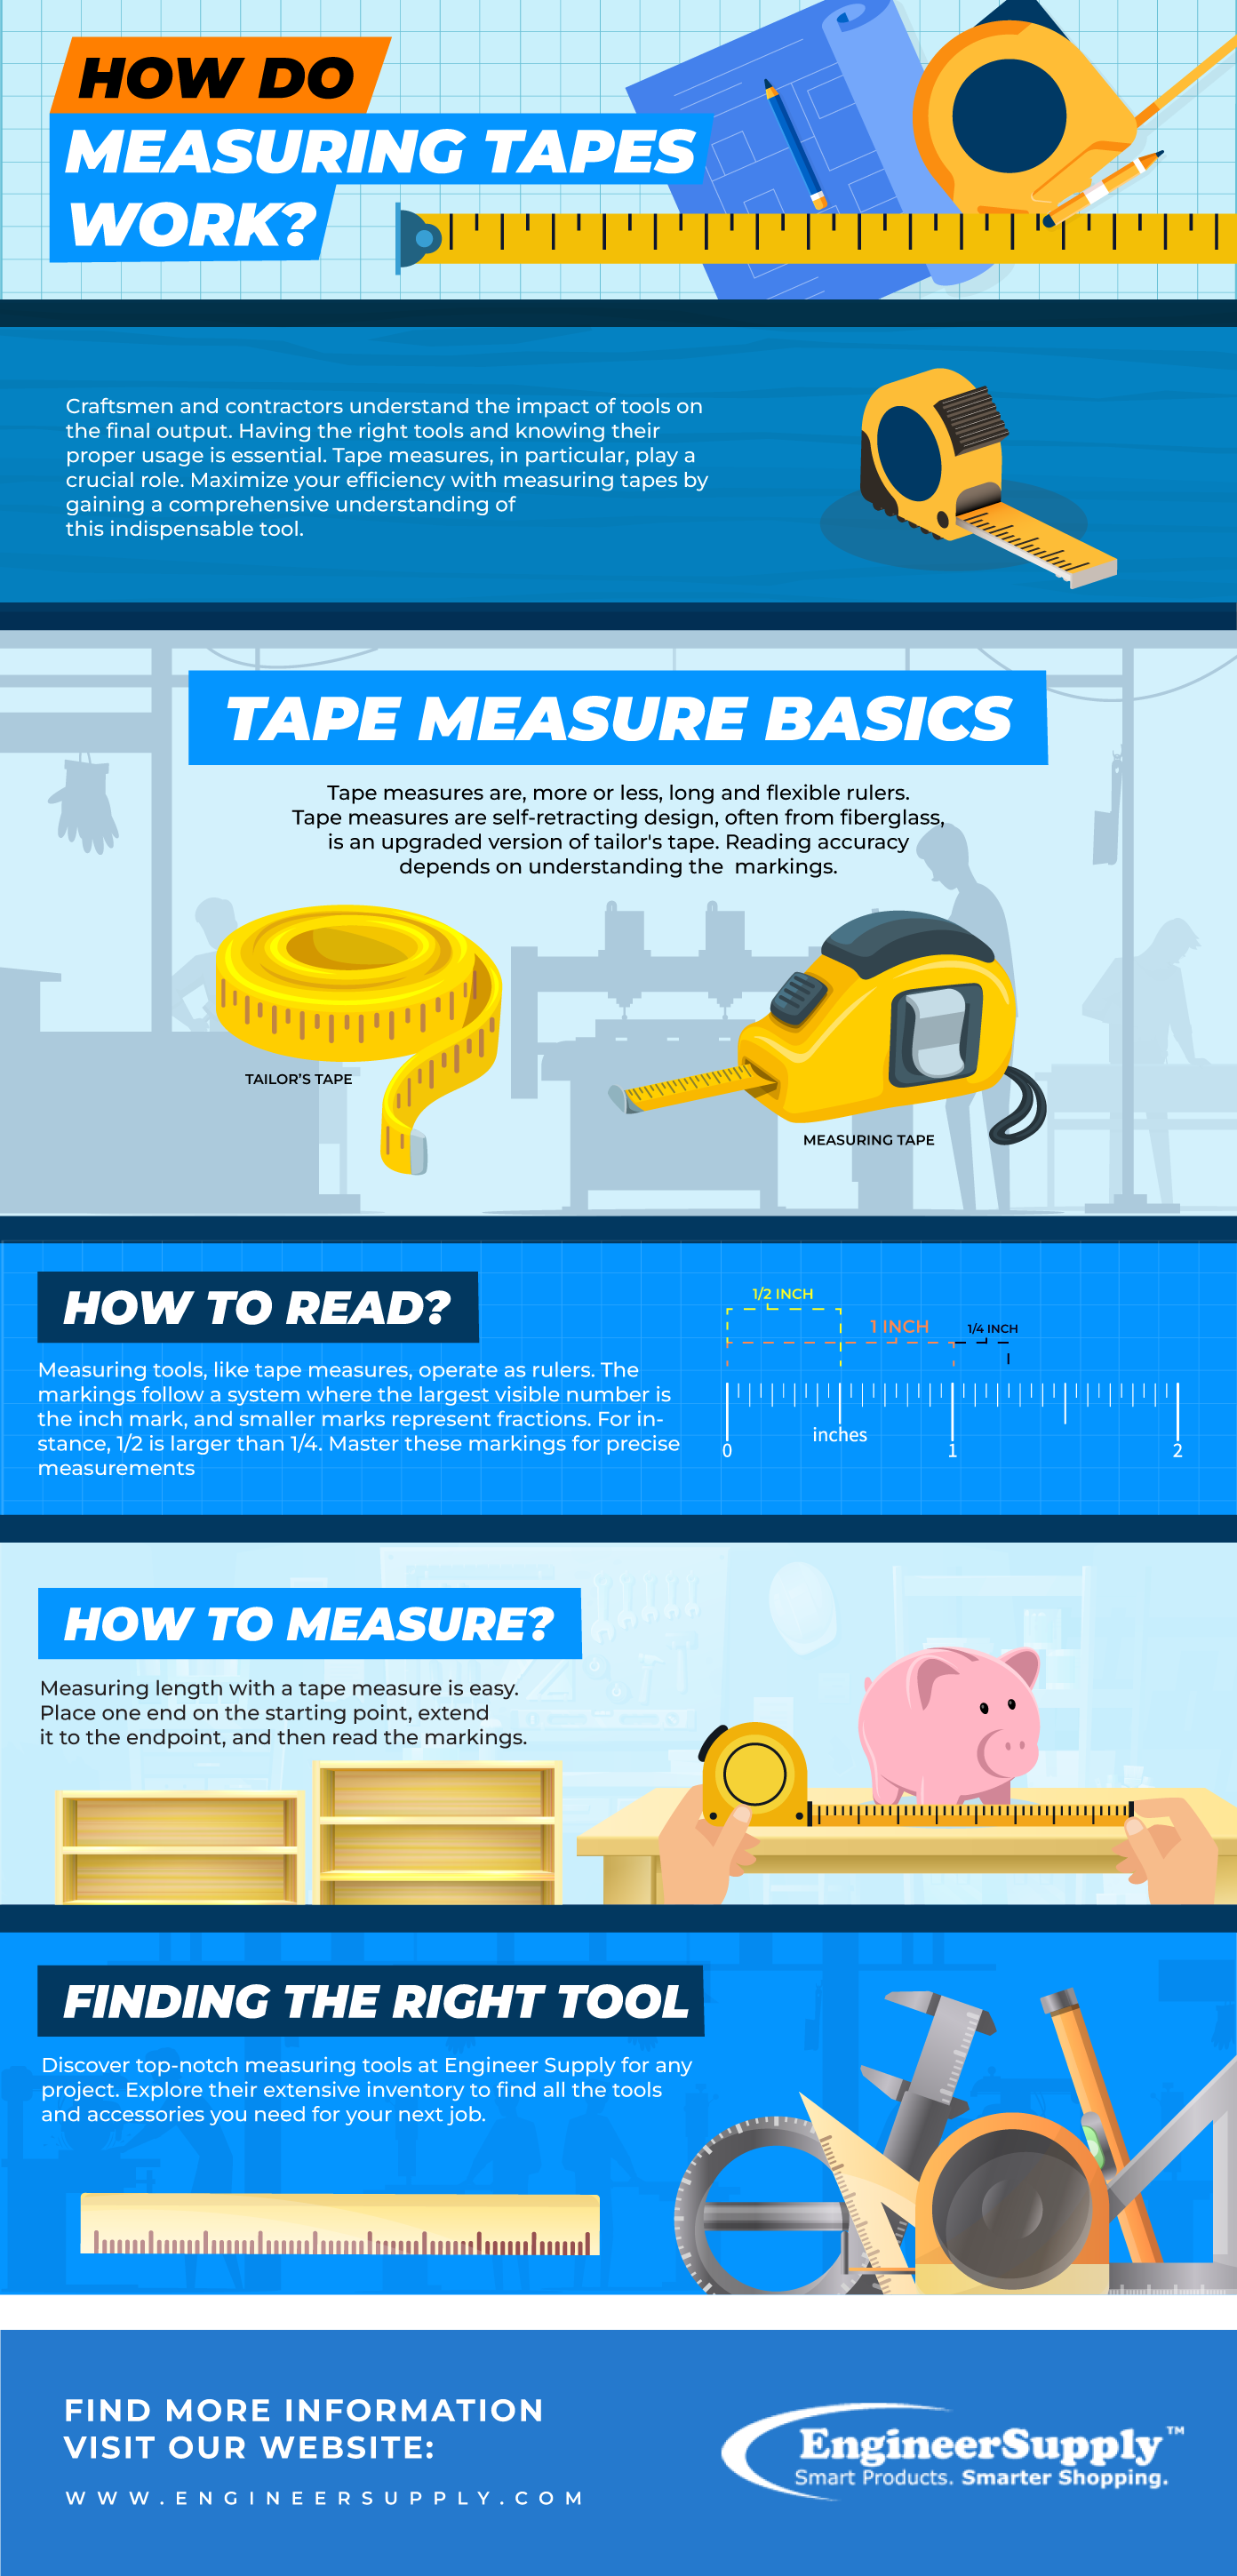 https://www.engineersupply.com/Images/How%20do%20Measuring%20Tapes%20Work.png